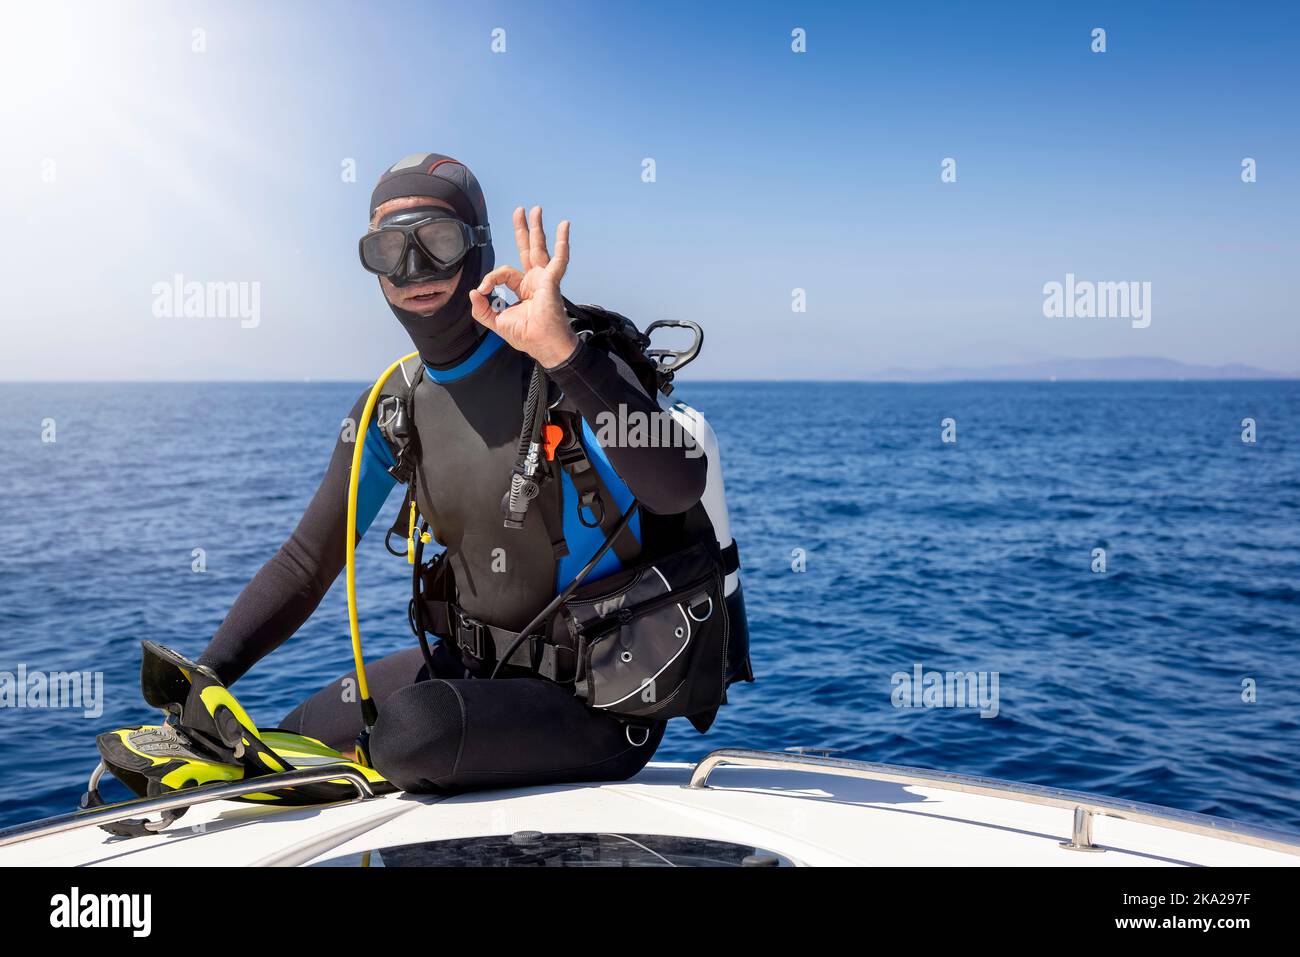 A scuba diver sits on a boat and signals the OK sign Stock Photo